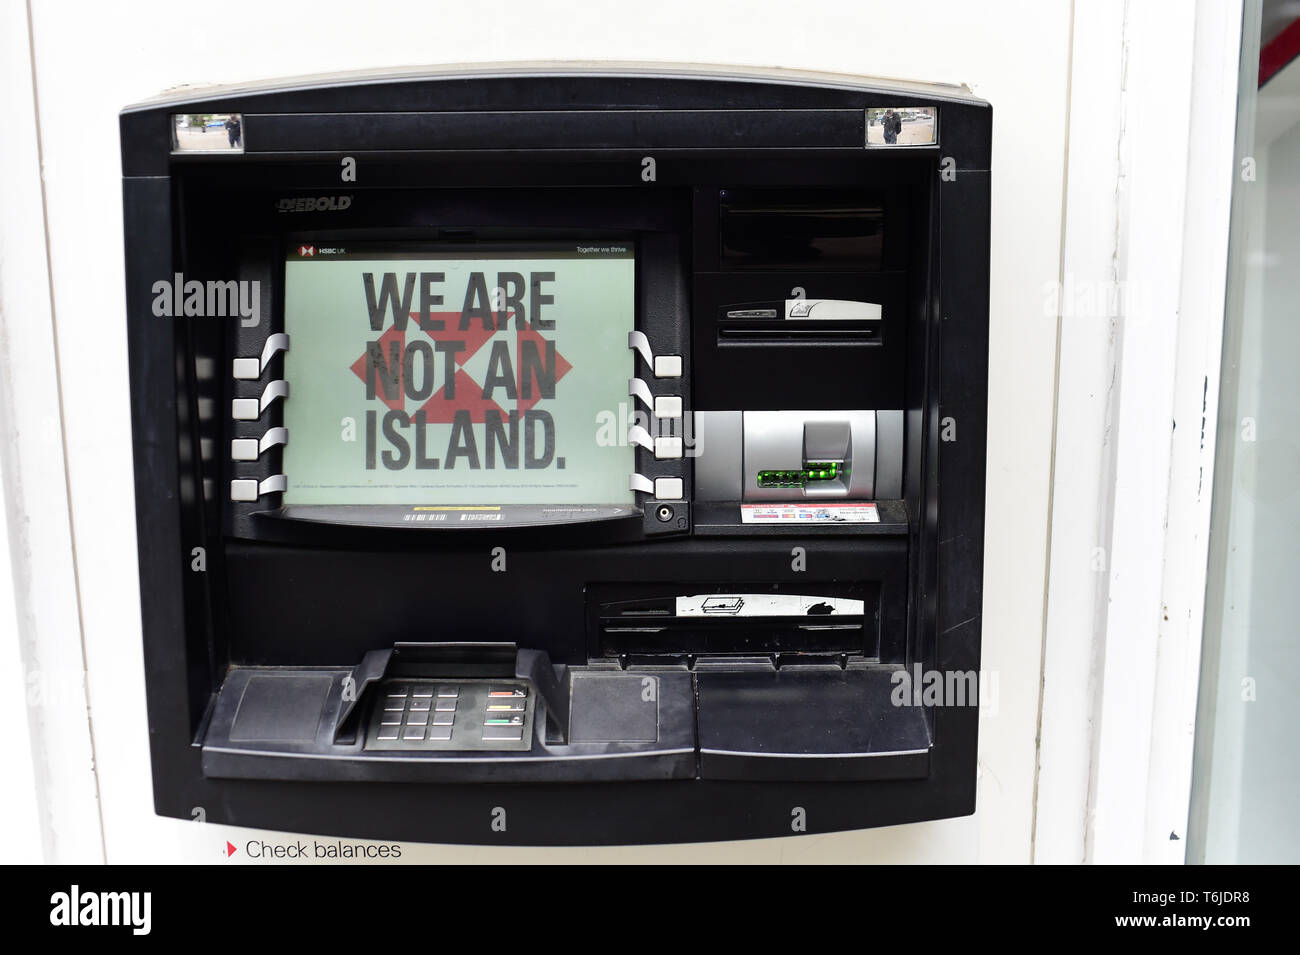 London, UK. 1st May, 2019. HSBC Brexit cash point machine 'We are not a island' Credit: Van Quan/Alamy Live News Stock Photo